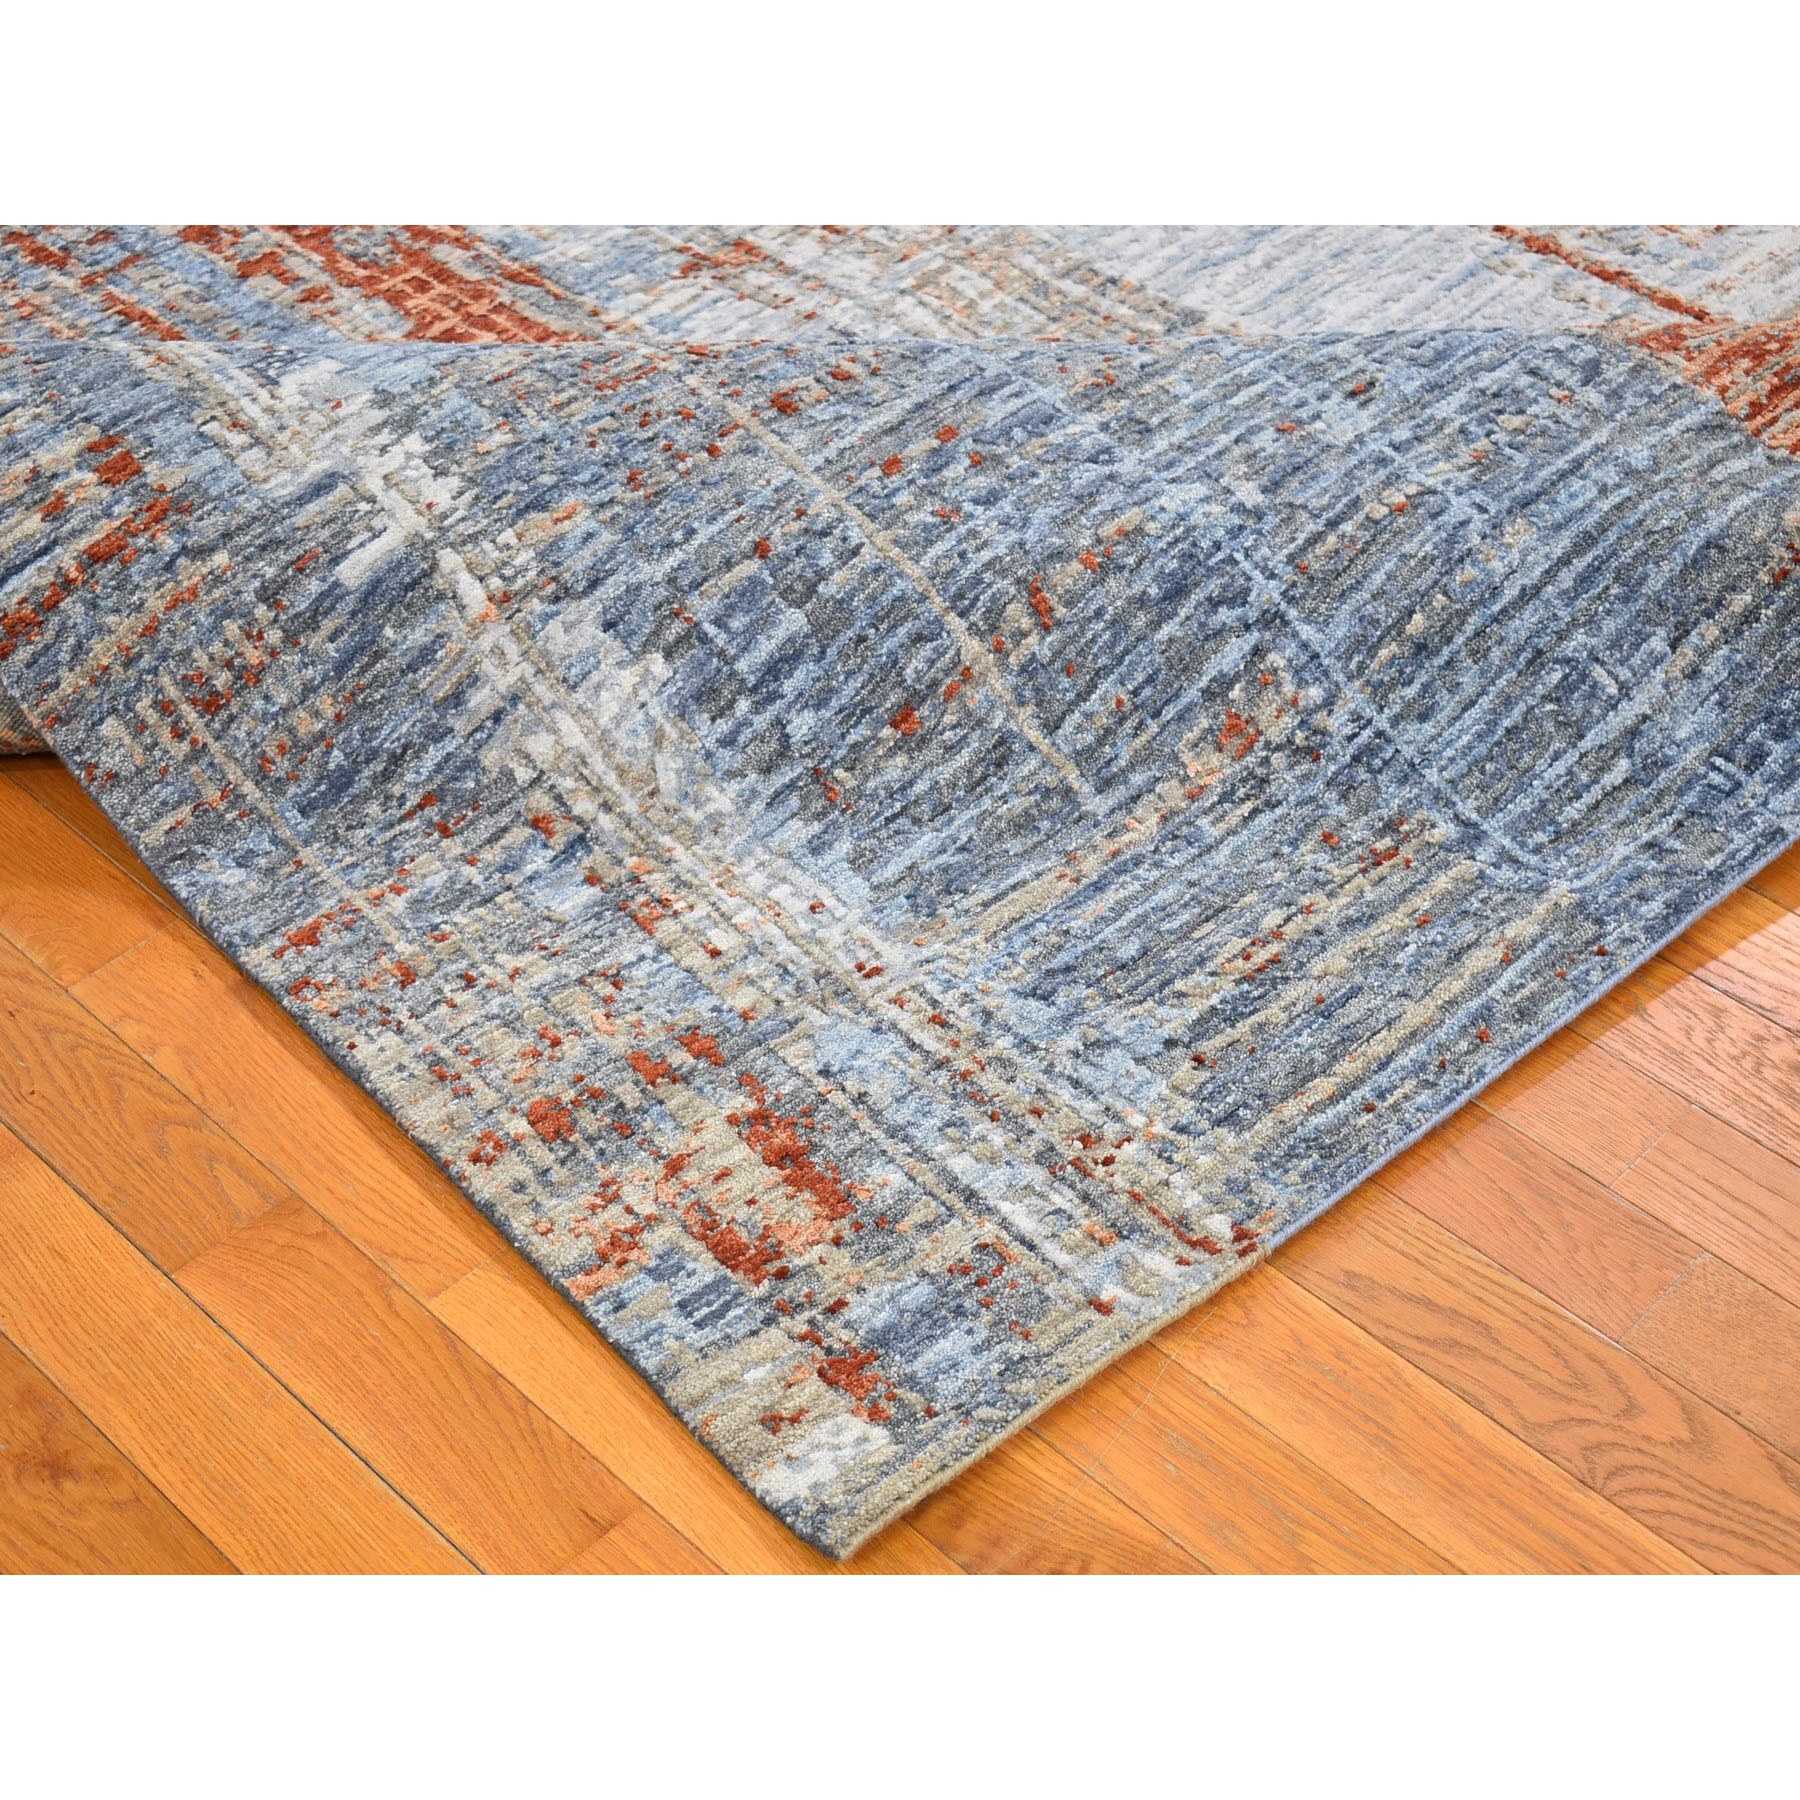 9'x12'2" Red Hi-Low Pile Abstract Design Denser Weave Wool and Silk Hand Woven Oriental Rug 